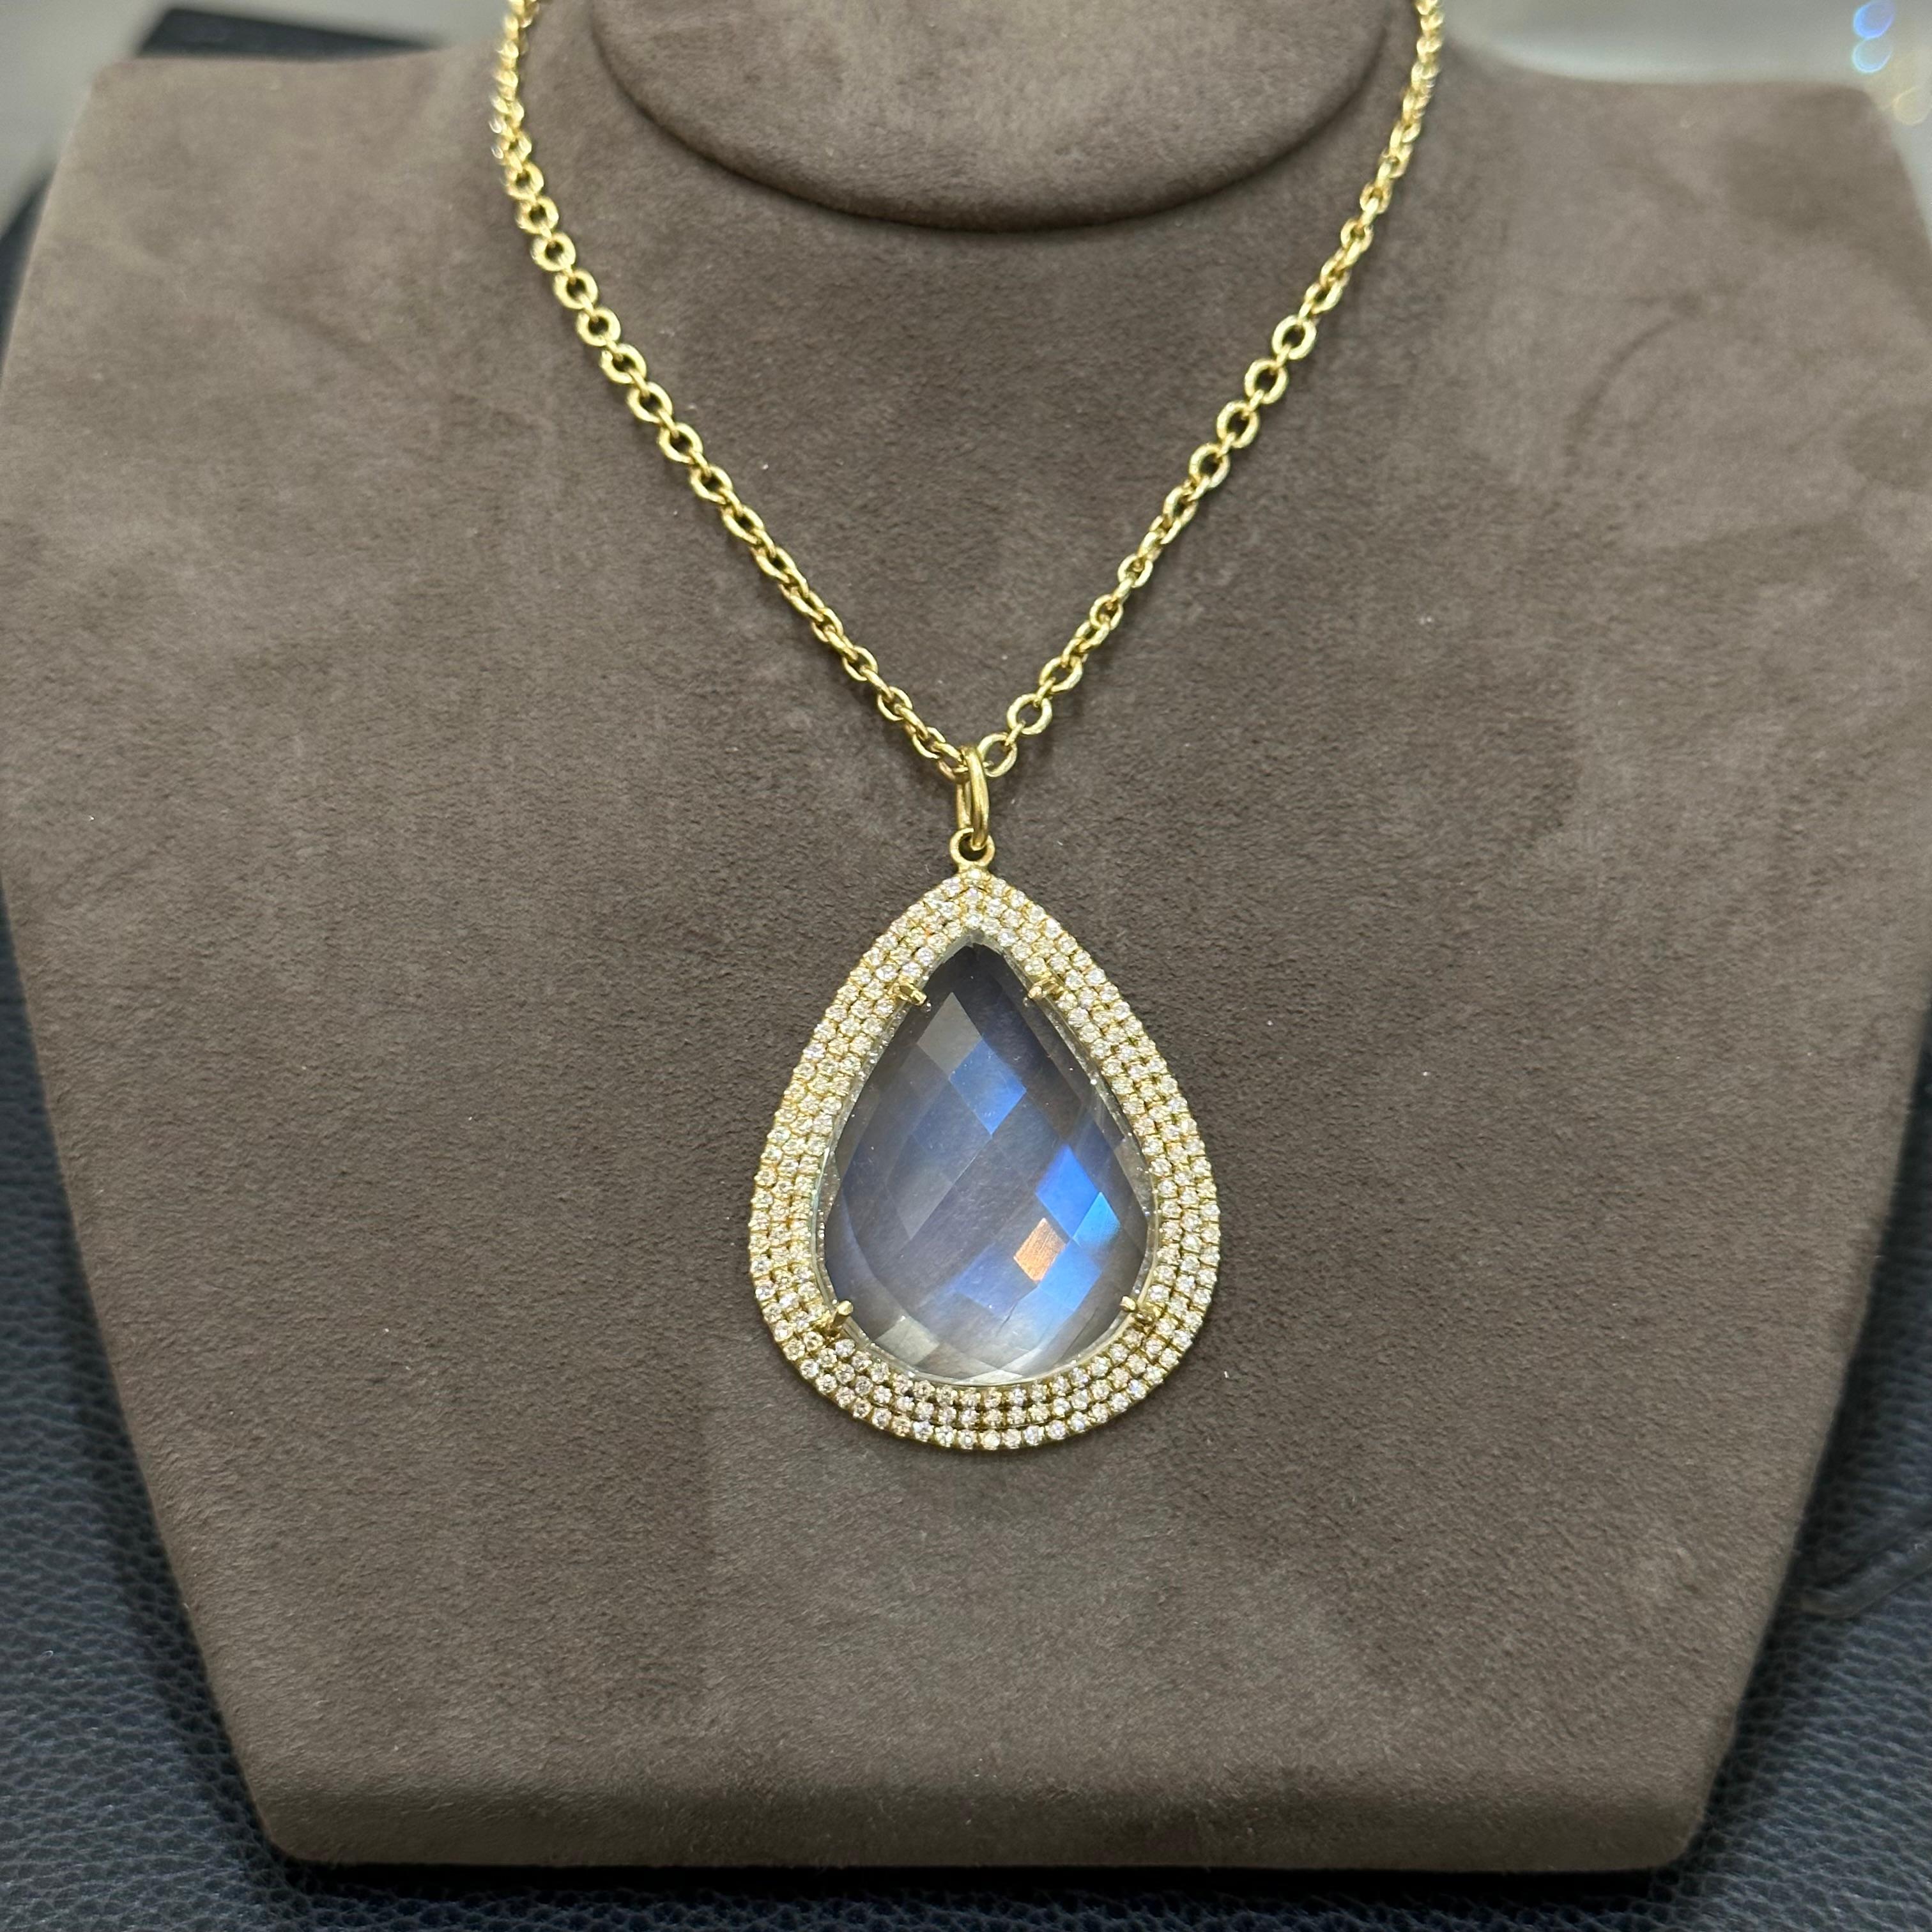 18K Yellow Gold Rose Cut Pear Shape Moonstone Pendant with Round Brilliant Diamonds. Comes on Yellow Gold Chain.
The moonstone has caterpillar inclusion on the side, barely noticeable from the front. If you look at the back of the moonstone, you can